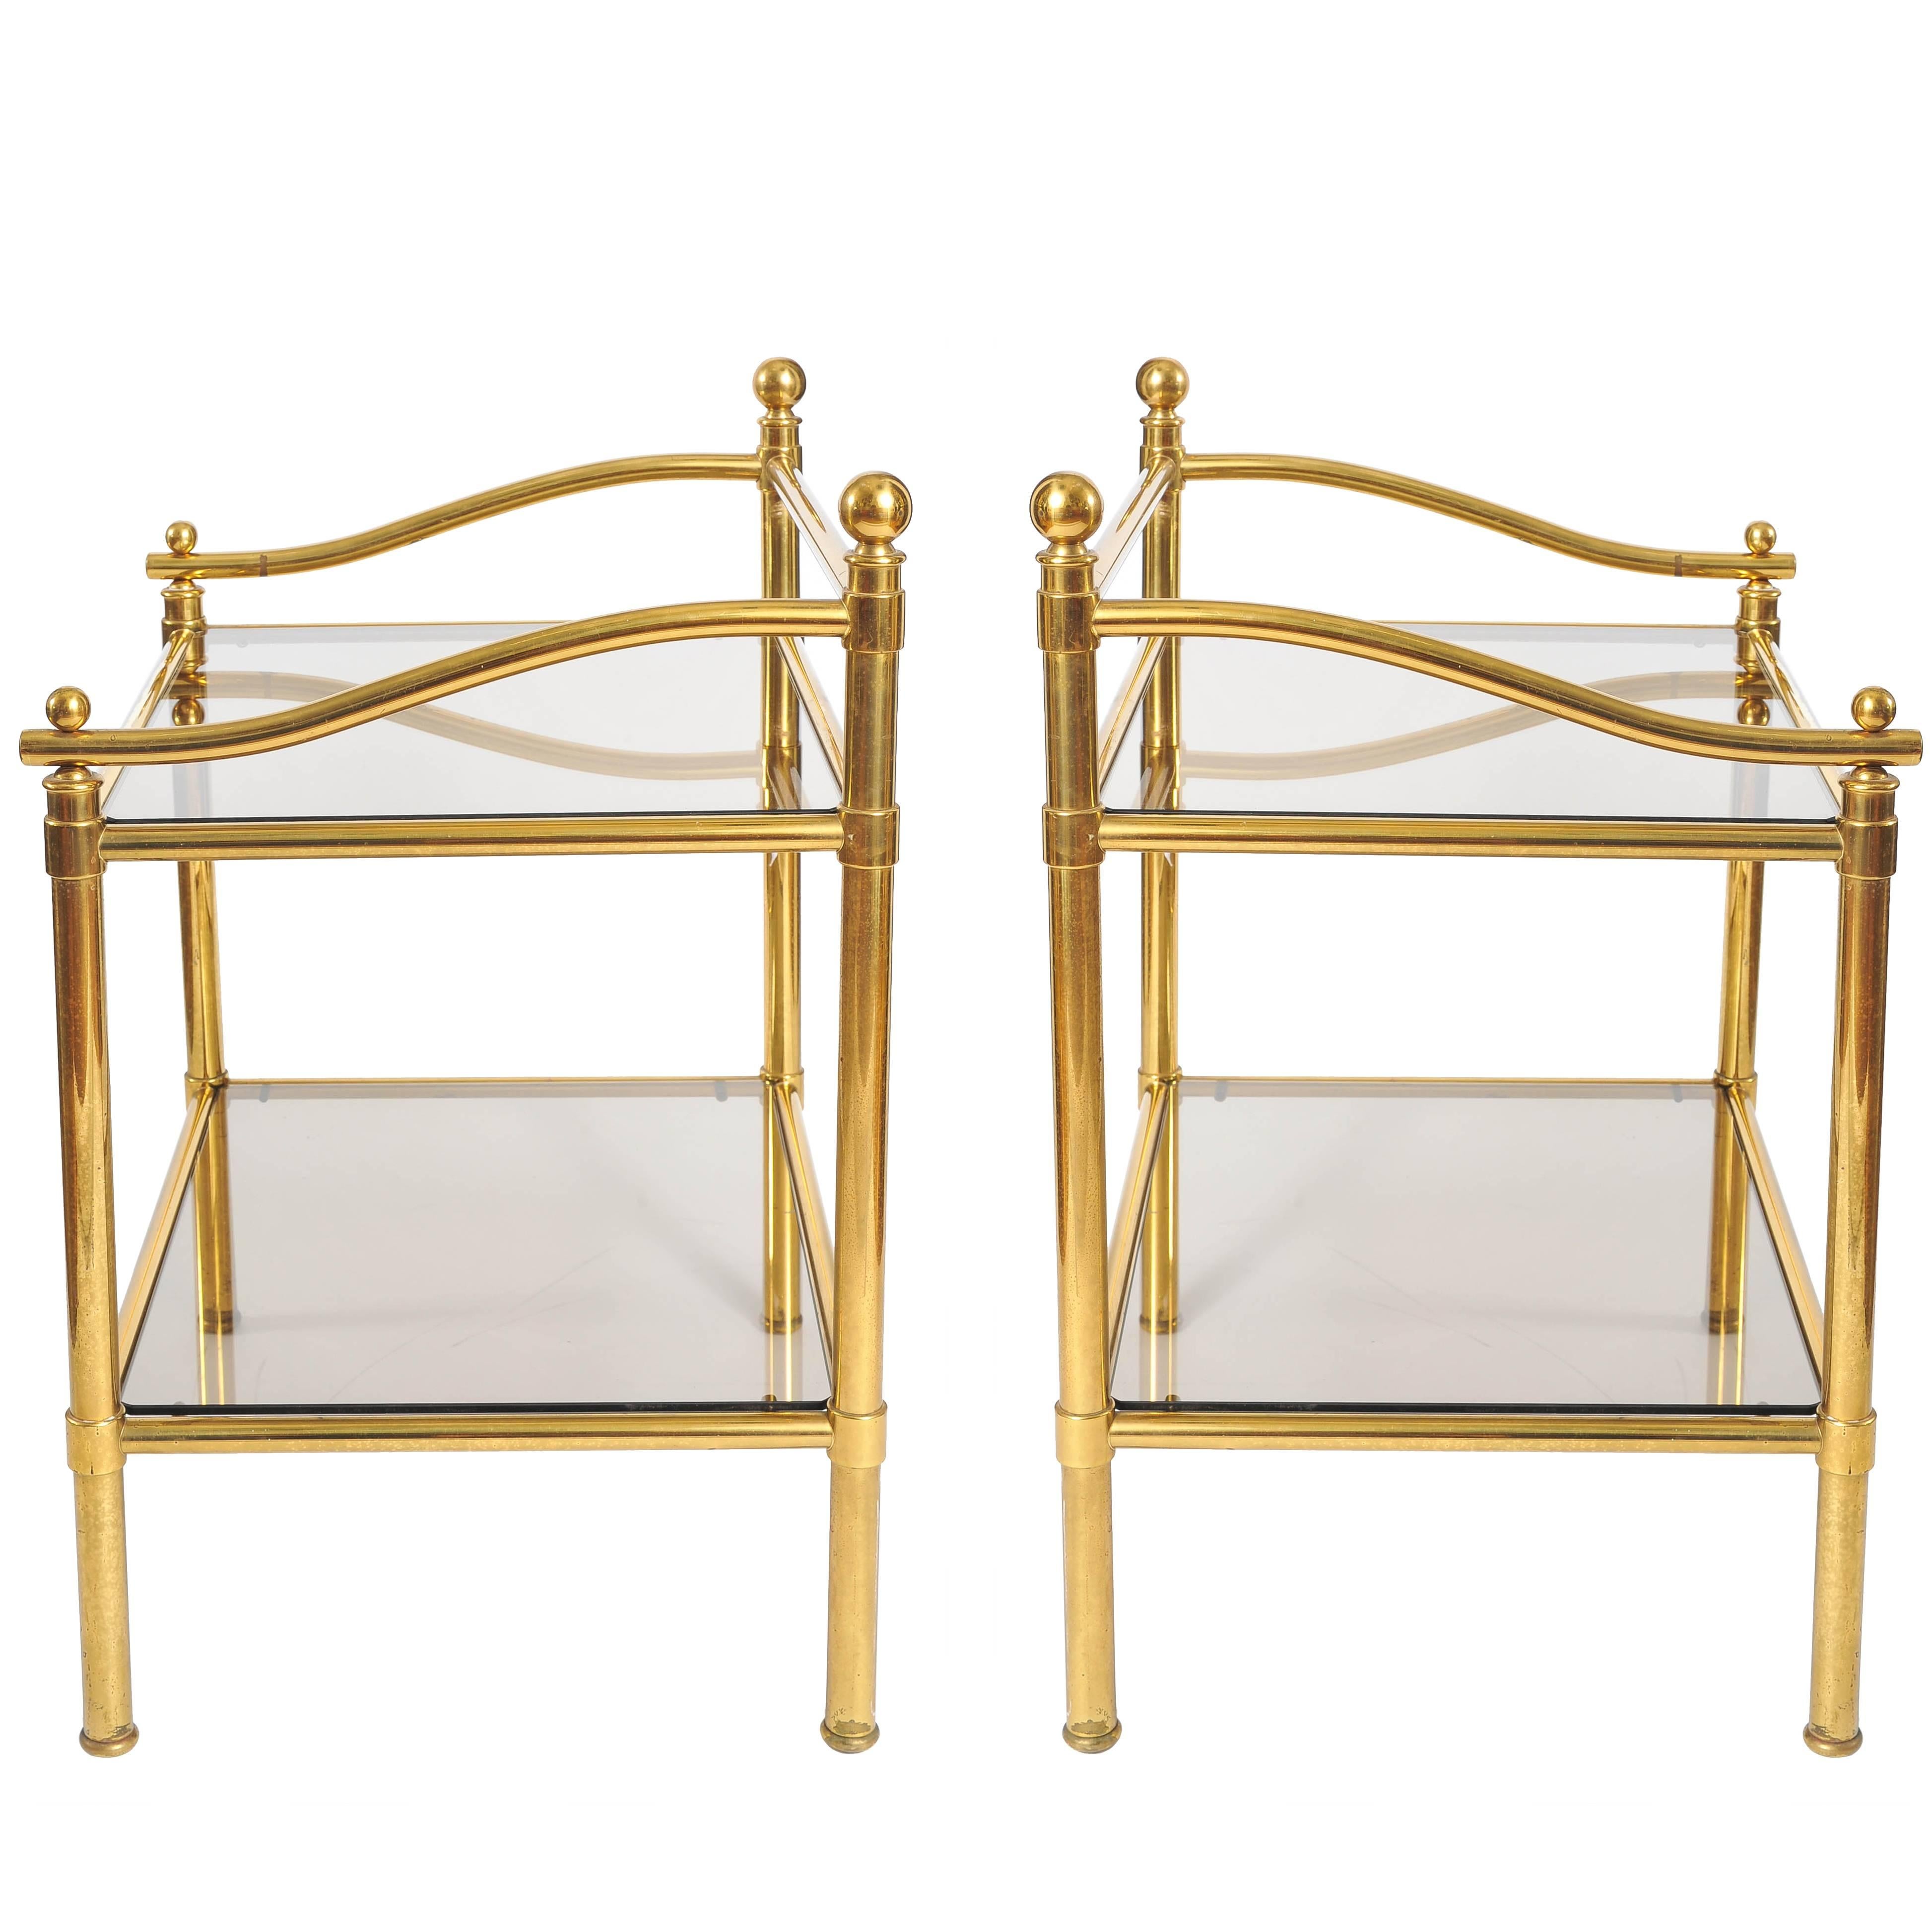 Elegant brass side tables with decorative curved sides and raised back frame, finished with brass finials. Two shelves of smokey glass.